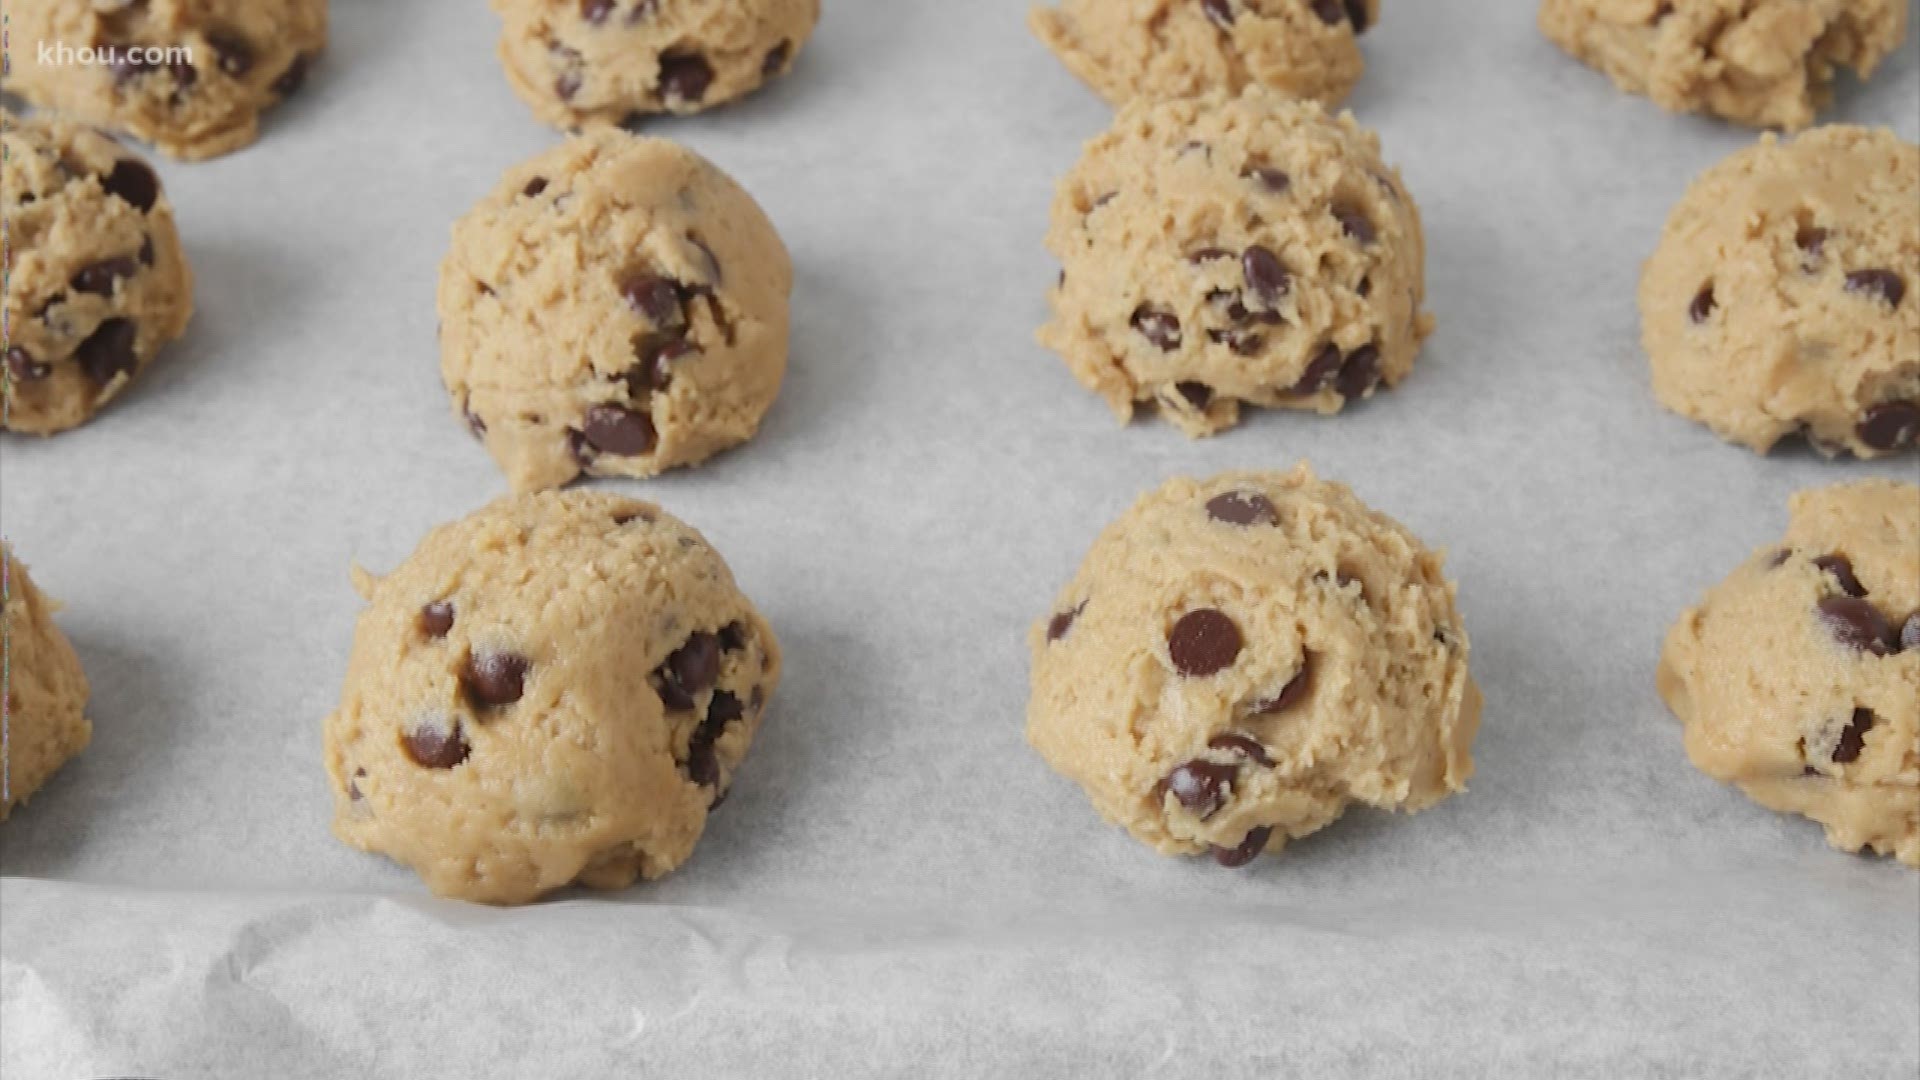 It's the season for sweet treats, but you might want to think twice before taking a bit of raw cookie dough this year. Our Rekha Muddaraj explains why it could be a big health risk.